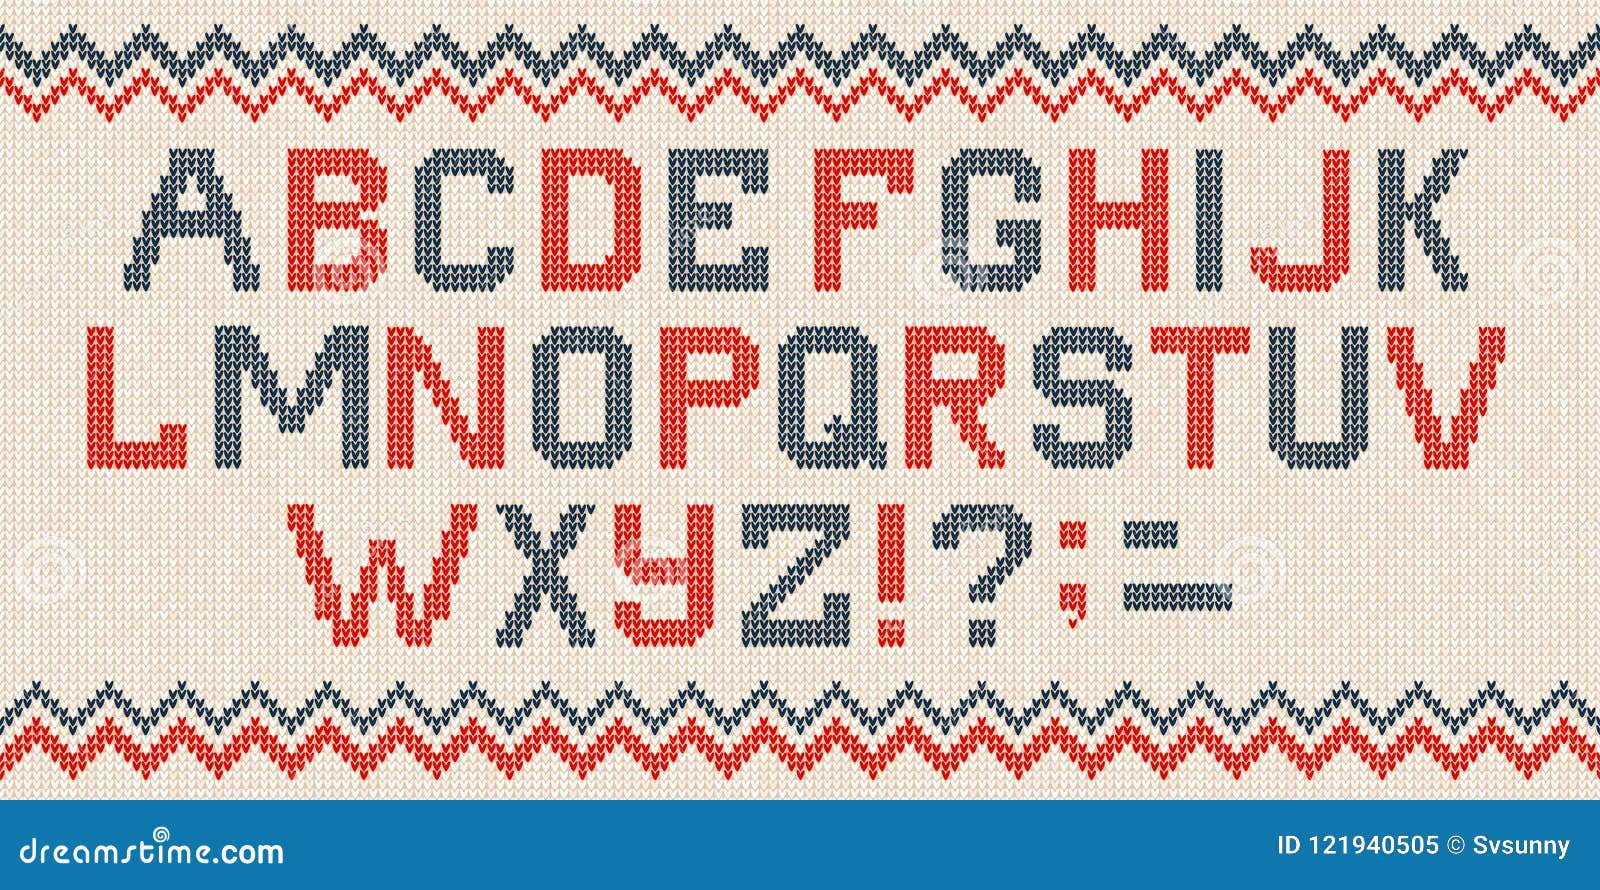 Folk Christmas Font Scandinavian Style Knitted Letters Alphabet Seamless Pattern Stock Vector Illustration Of Knitwear Embroidery 121940505